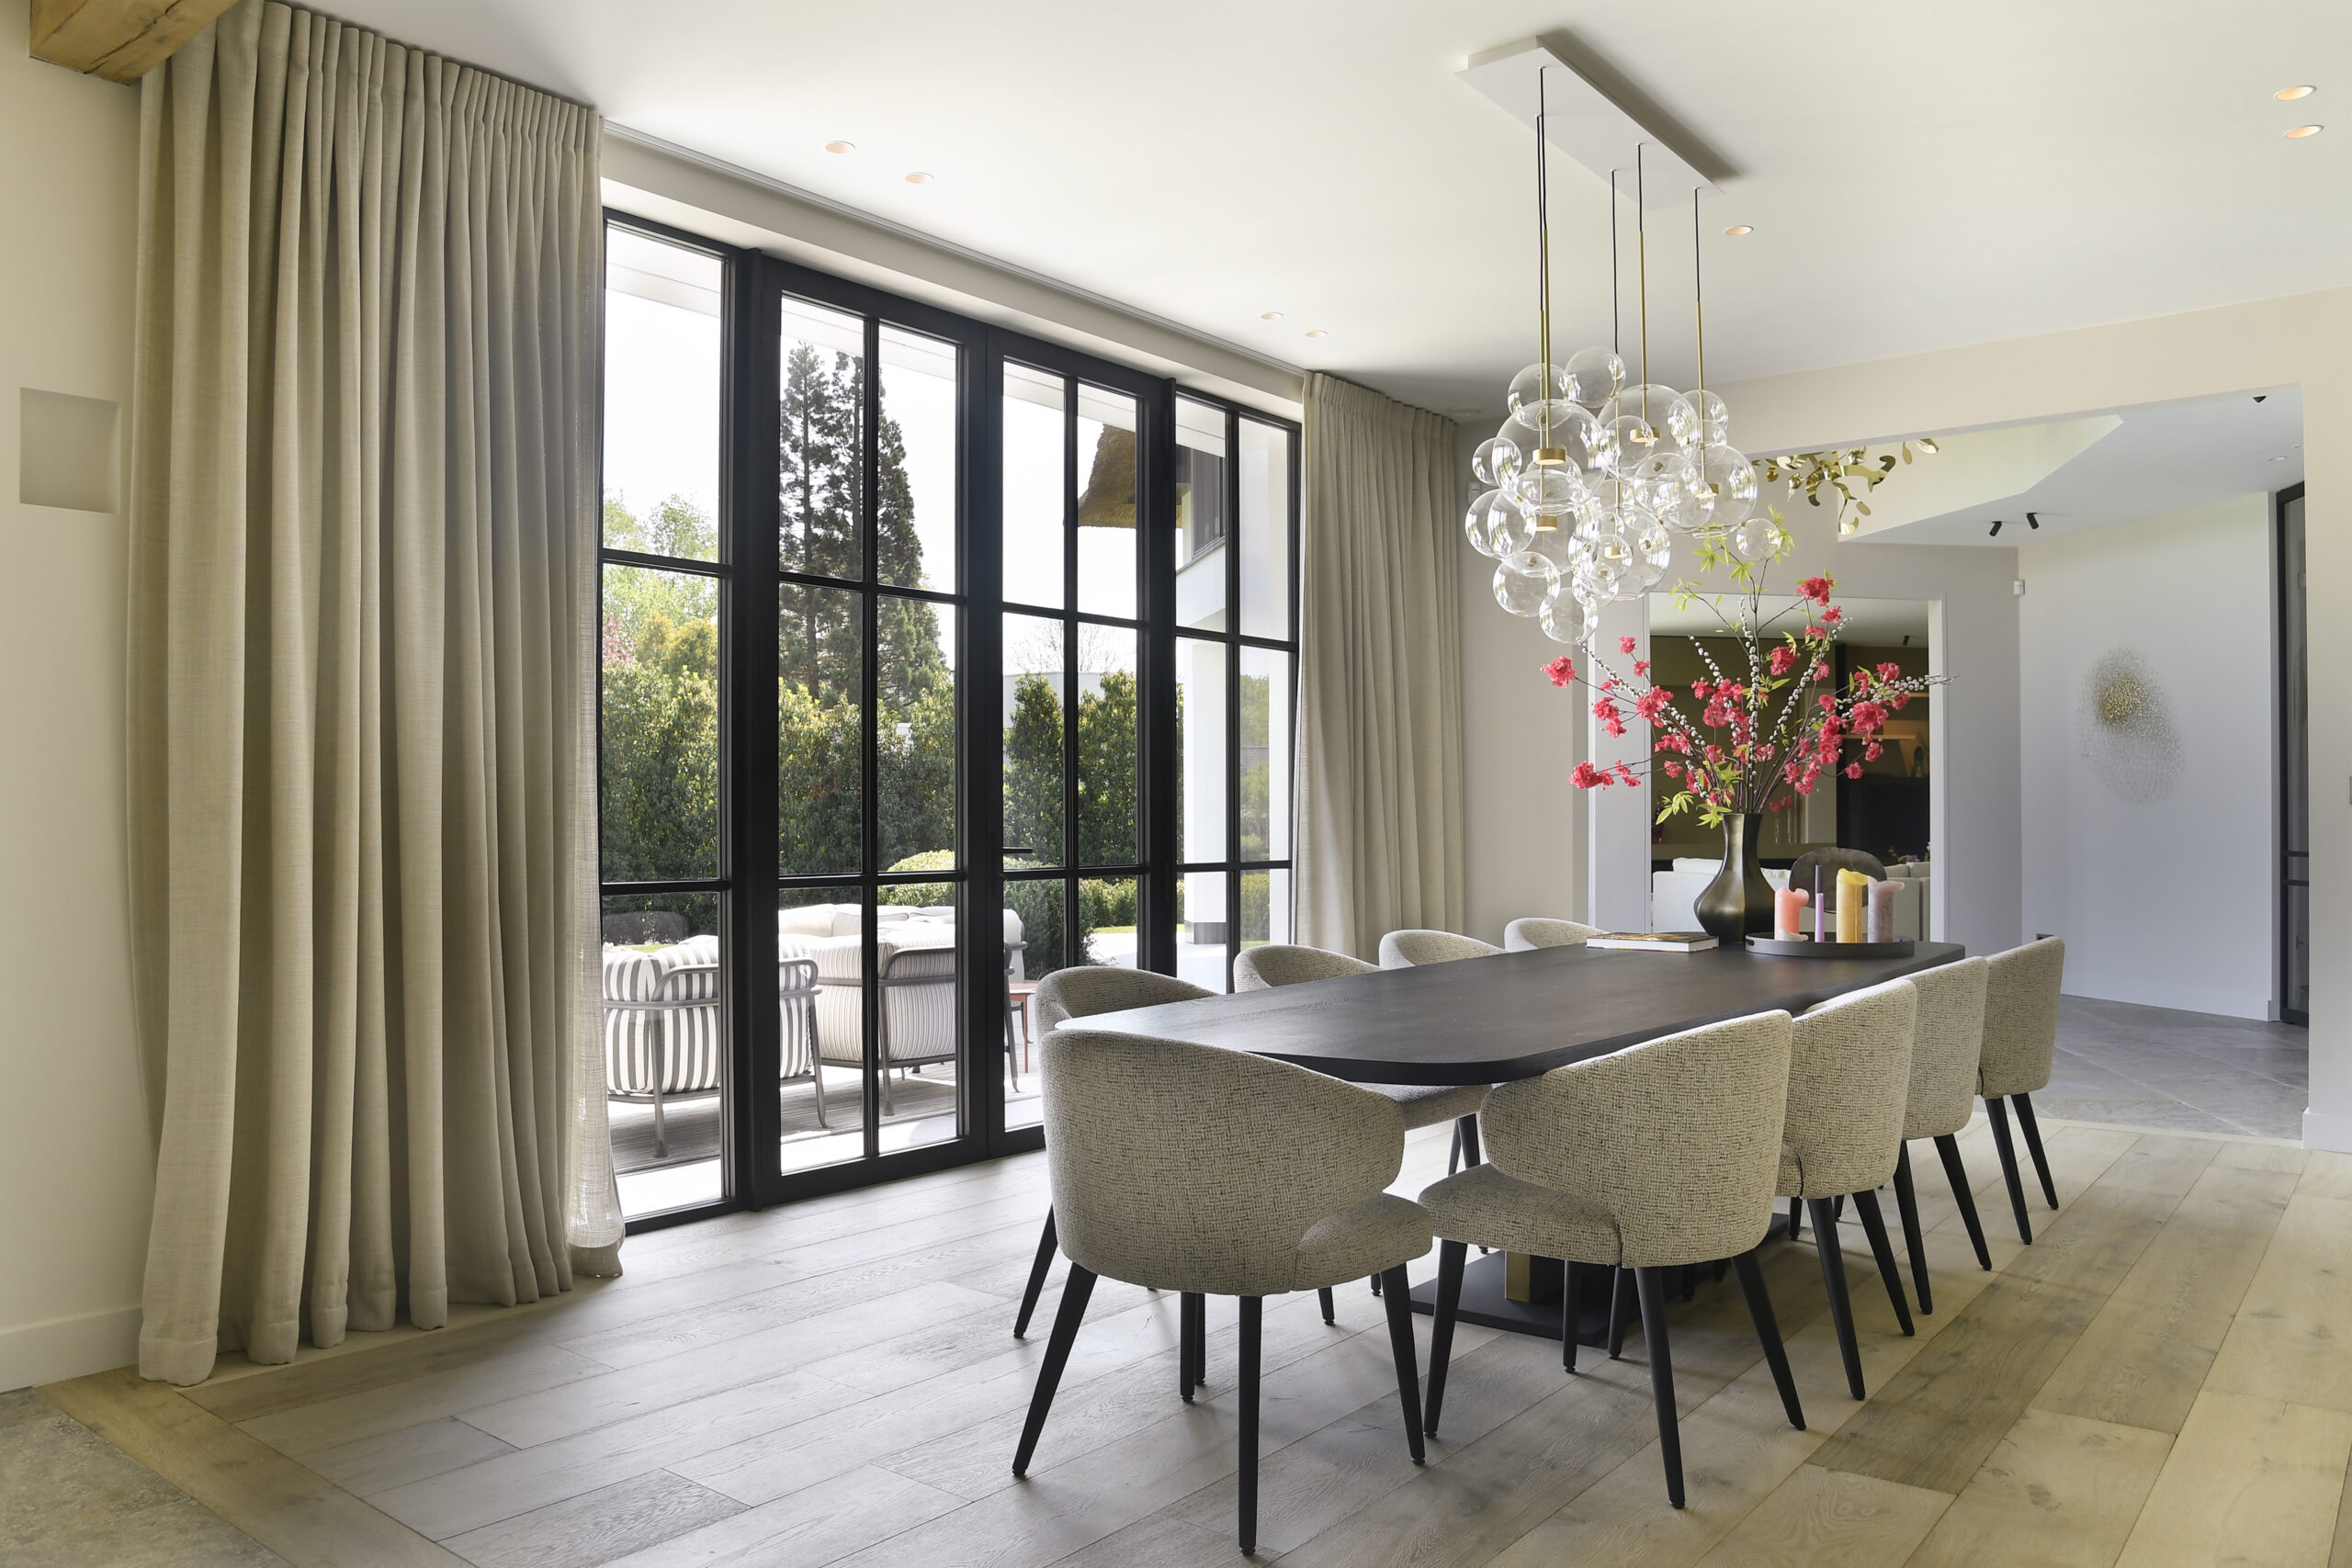 Modern dining room with large windows, elegant chandelier, and a wooden table surrounded by upholstered chairs.